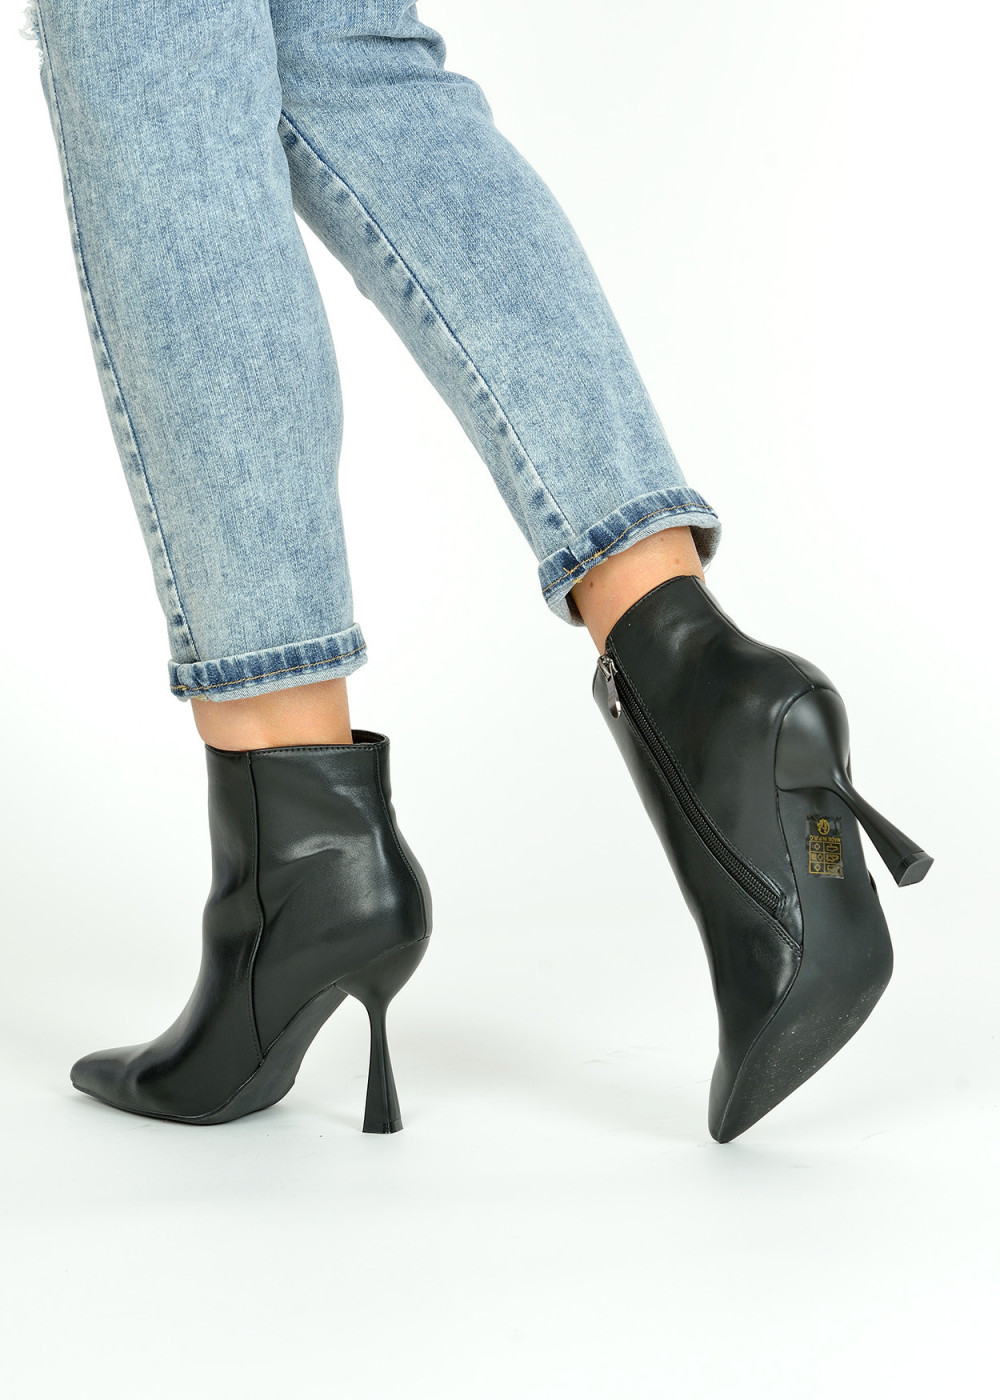 High ankle boots with platform heels in real leather - Shoebidoo Shoes |  Giaro high heels